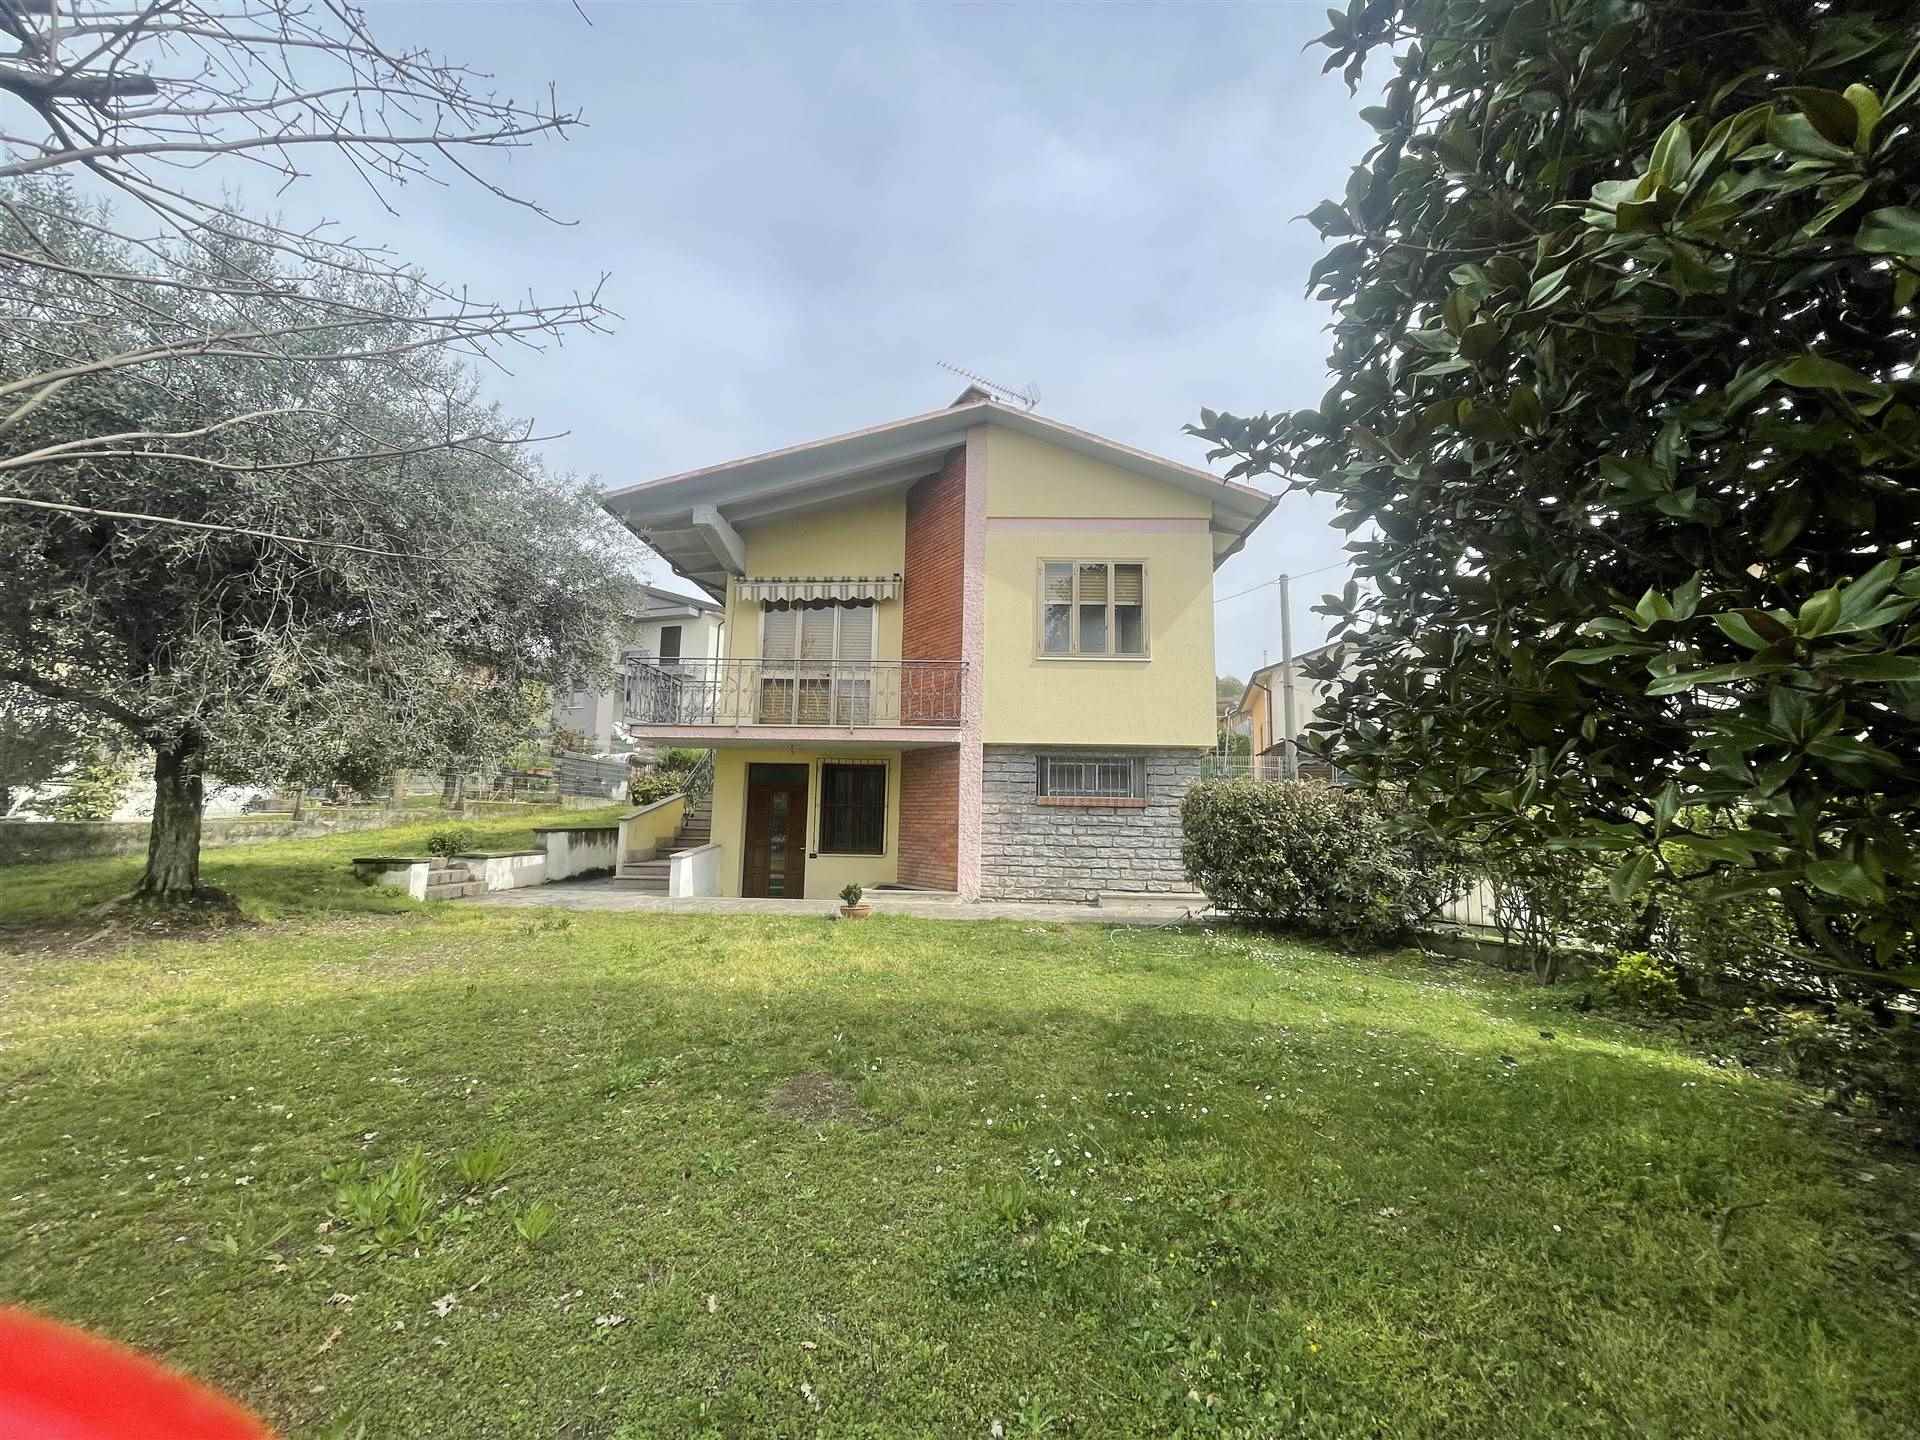 CASTIGLIONE DELLE STIVIERE, Villa for sale of 220 Sq. mt., Energetic class: G, placed at Ground, composed by: 6 Rooms, Kitchenette, 4 Bedrooms, 2 